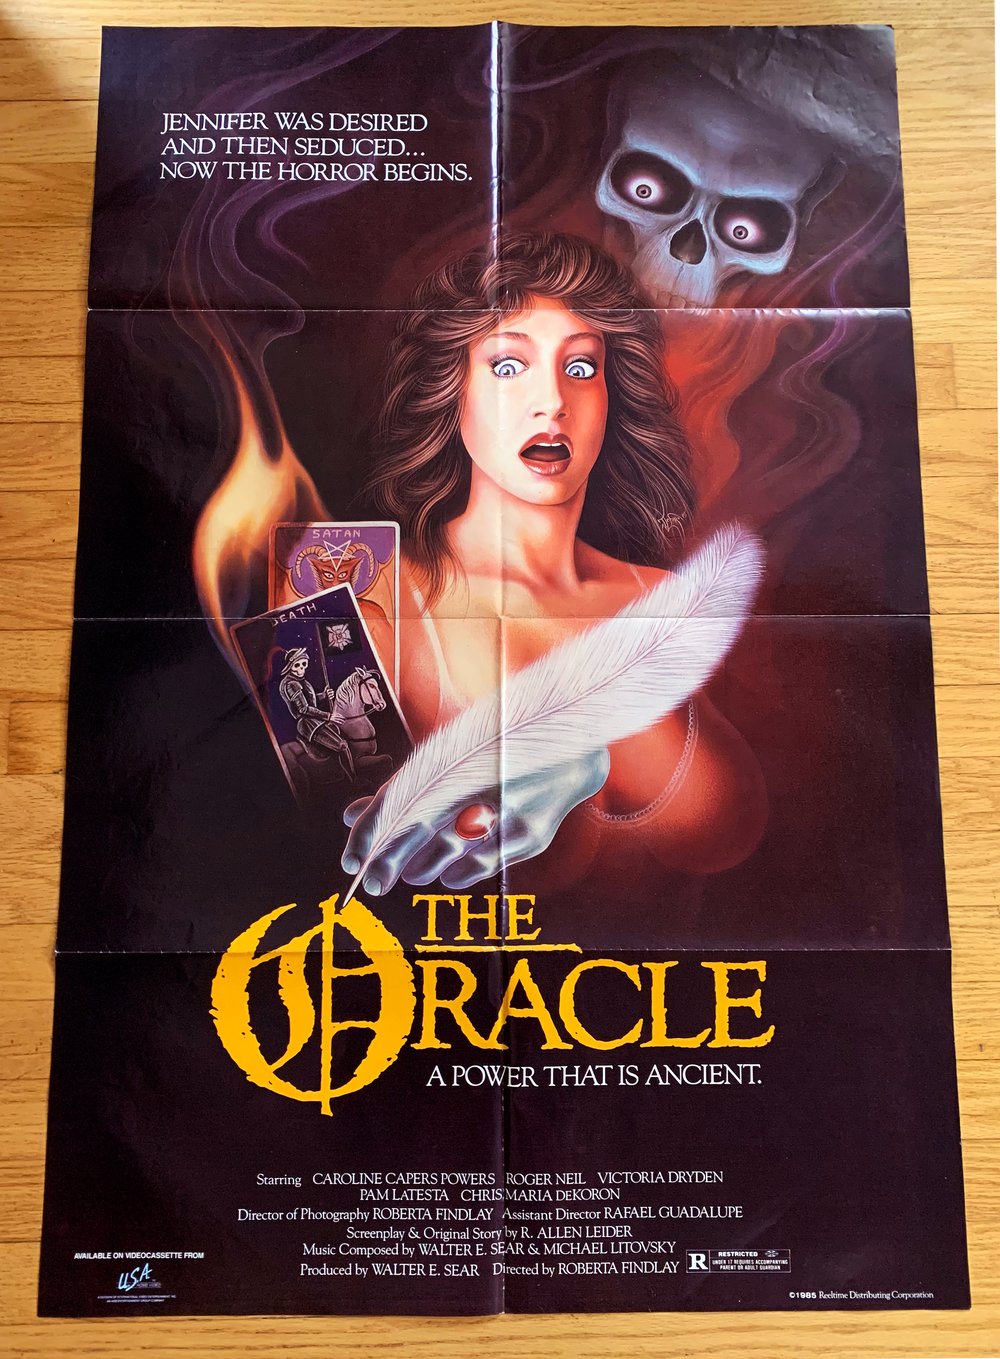 1985 THE ORACLE Original USA Home Video Promotional Movie Poster